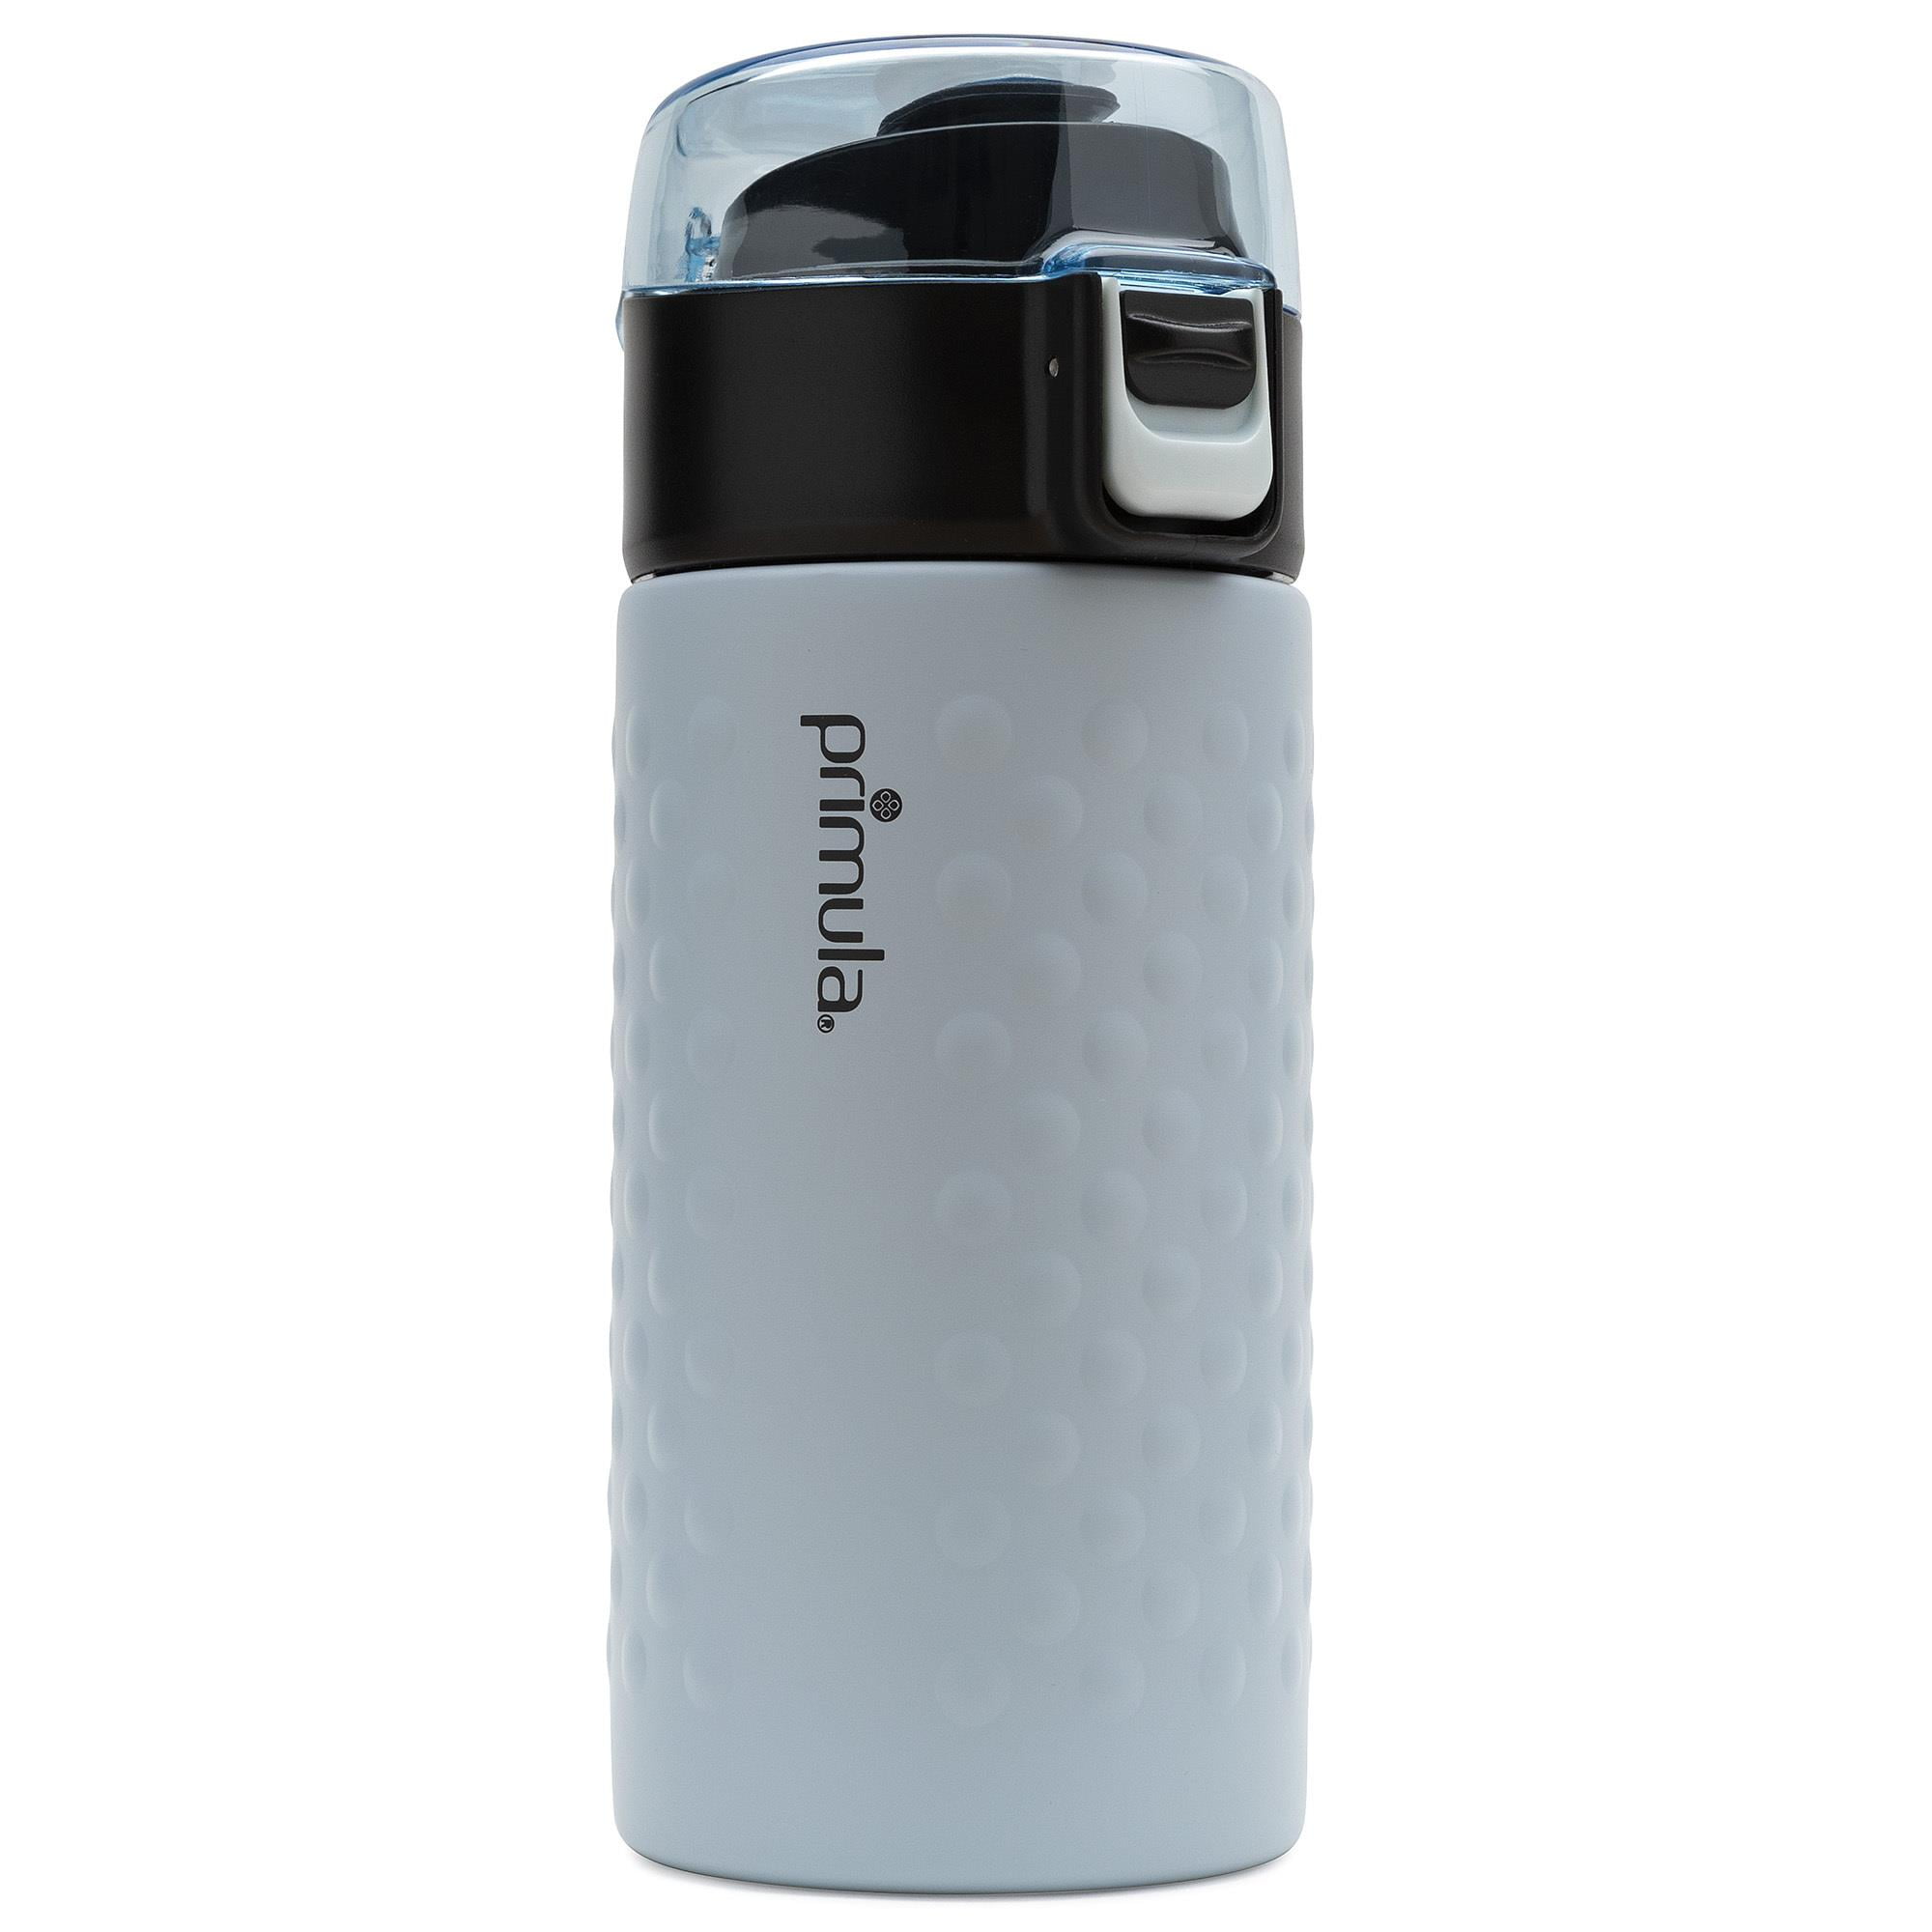 Primula Avalanche Double Walled Vacuum Sealed Stainless Steel Thermal  Insulated Tumbler Stays Cold o…See more Primula Avalanche Double Walled  Vacuum